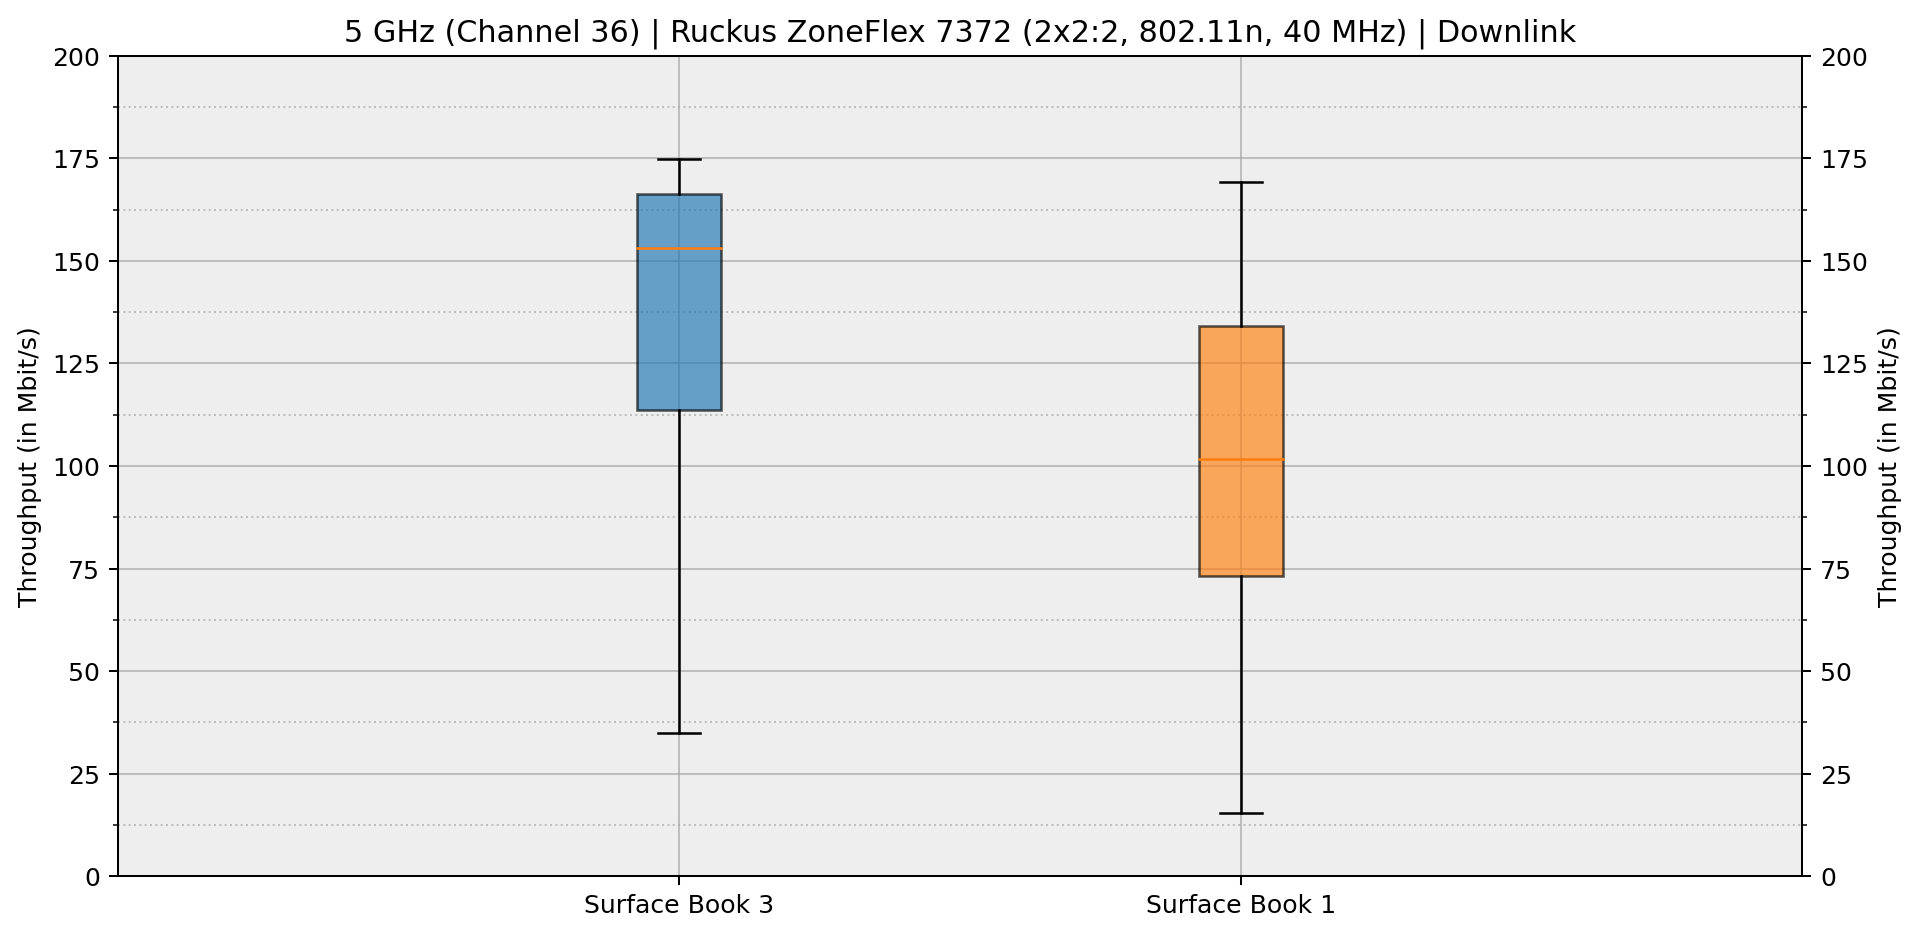 perfcomp-surface_book_3_vs_surface_book_1-box_plot-down.png